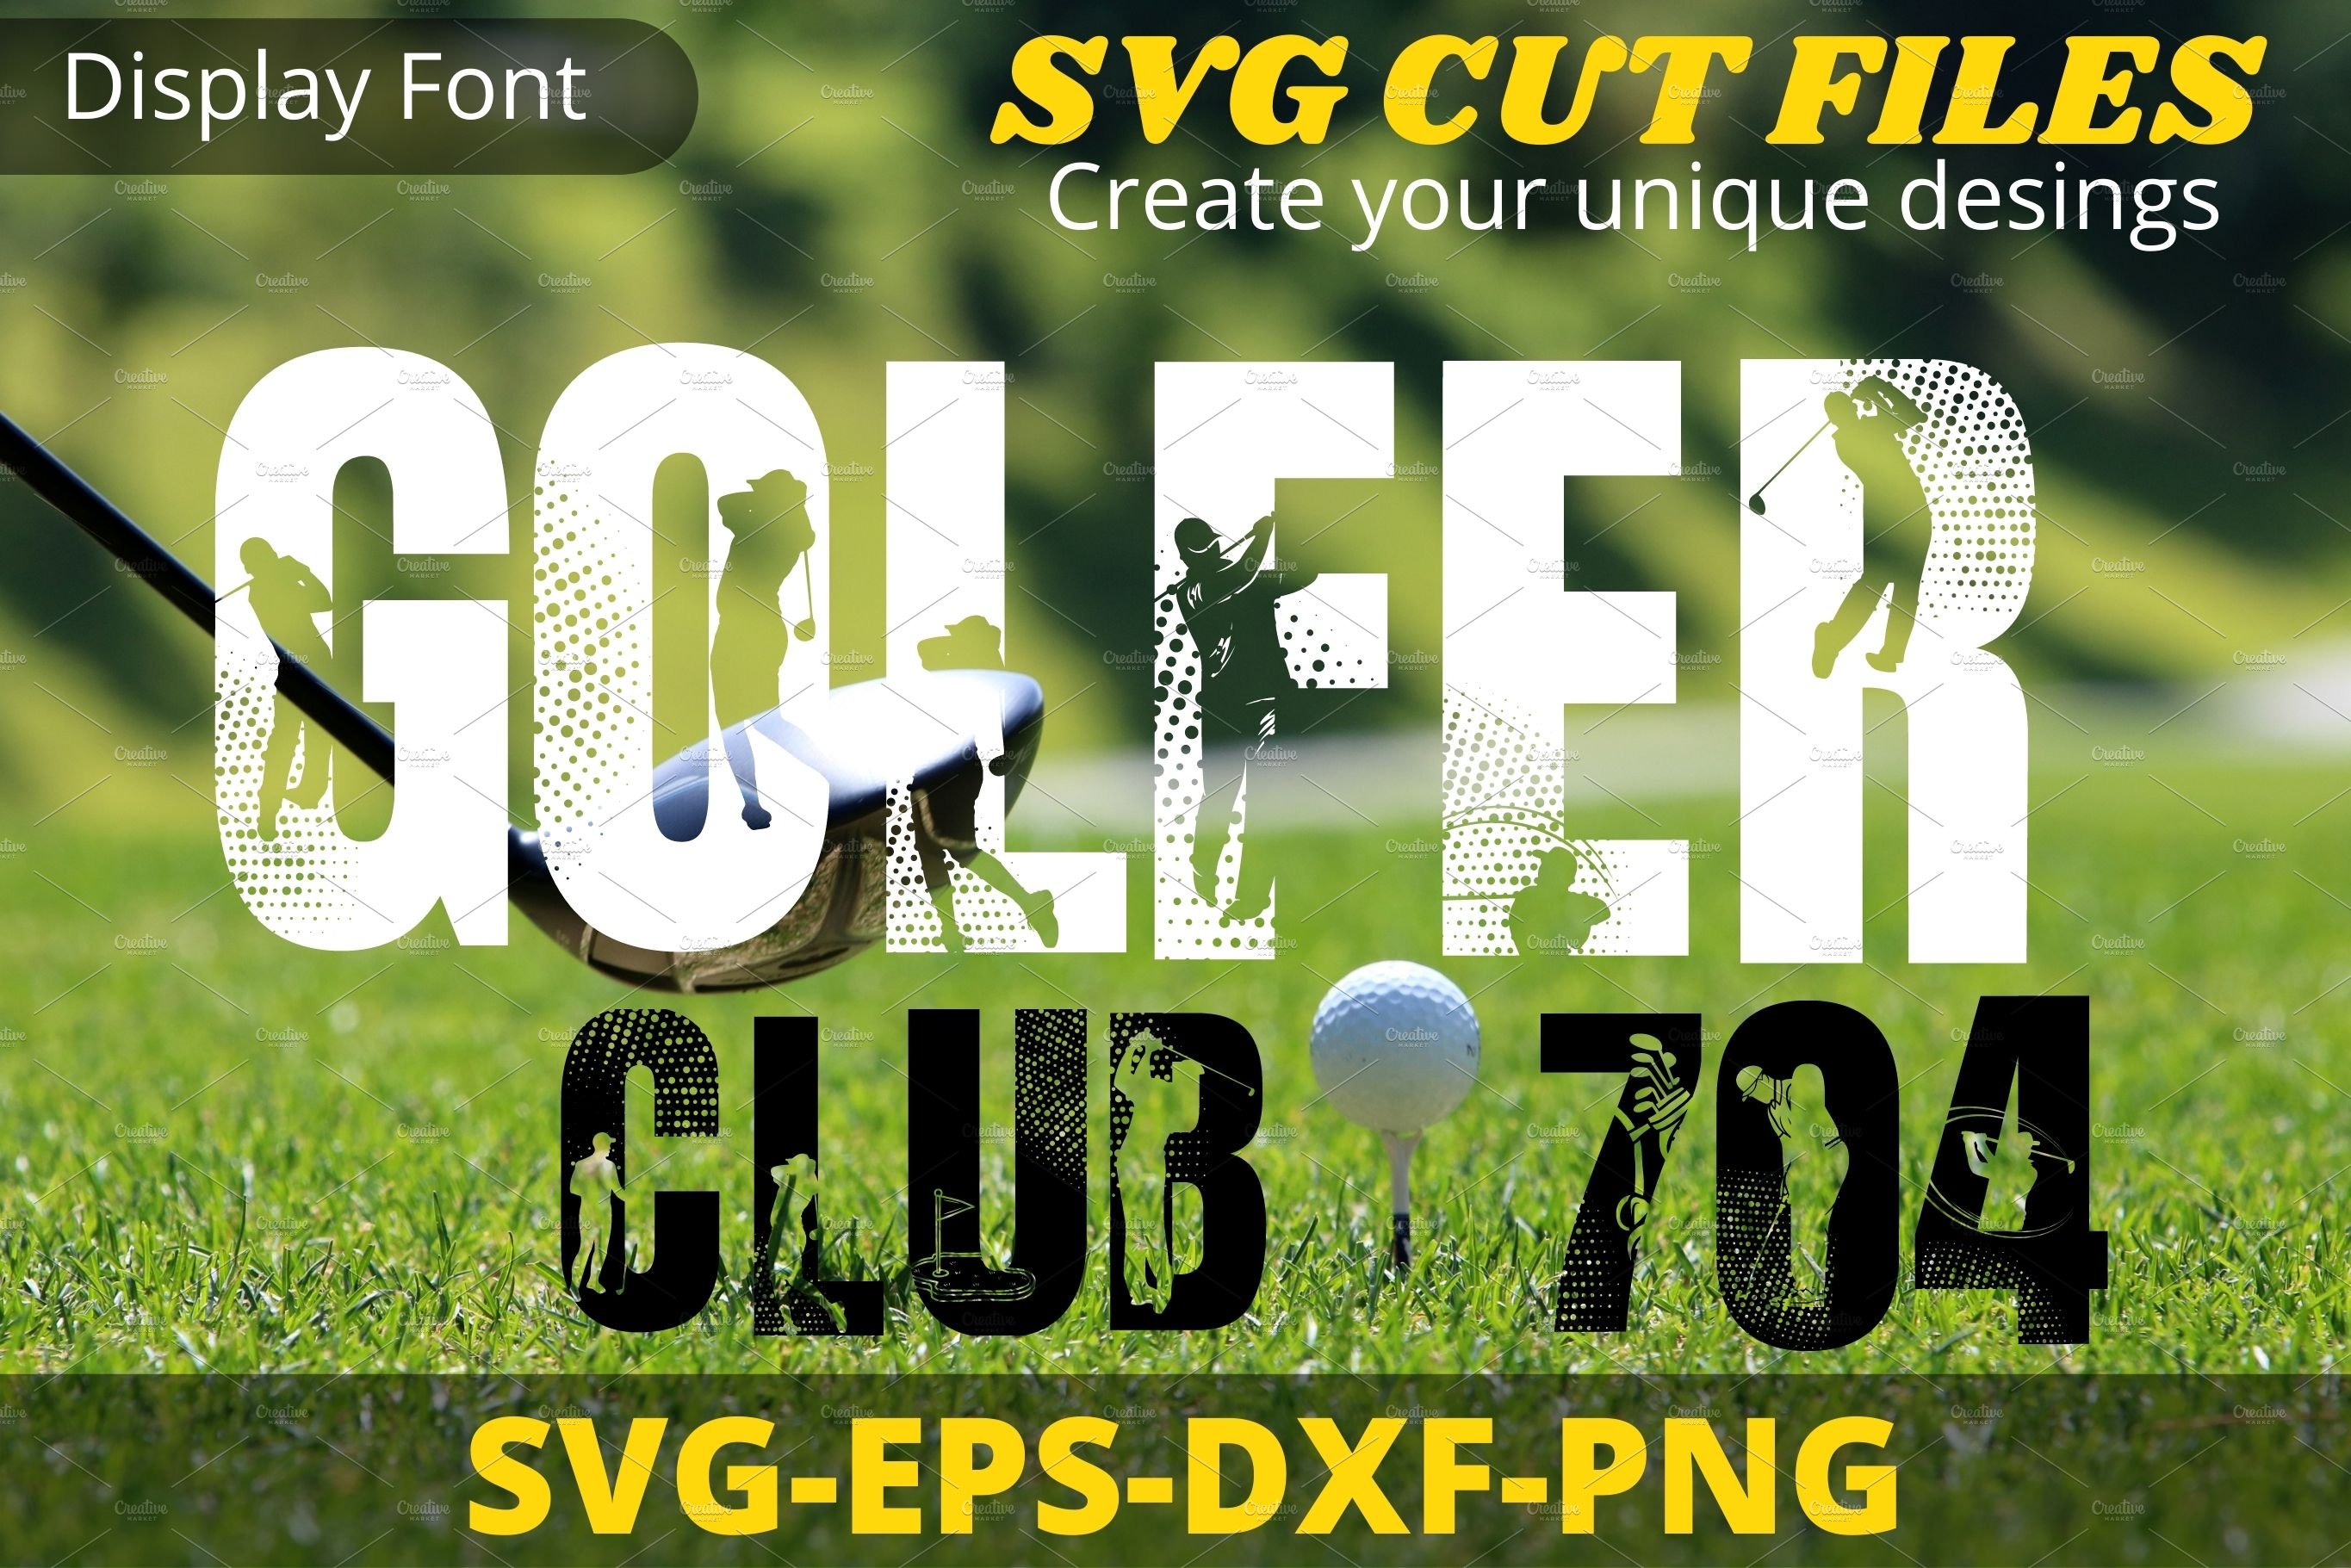 Golf, Golf Display font cover image.